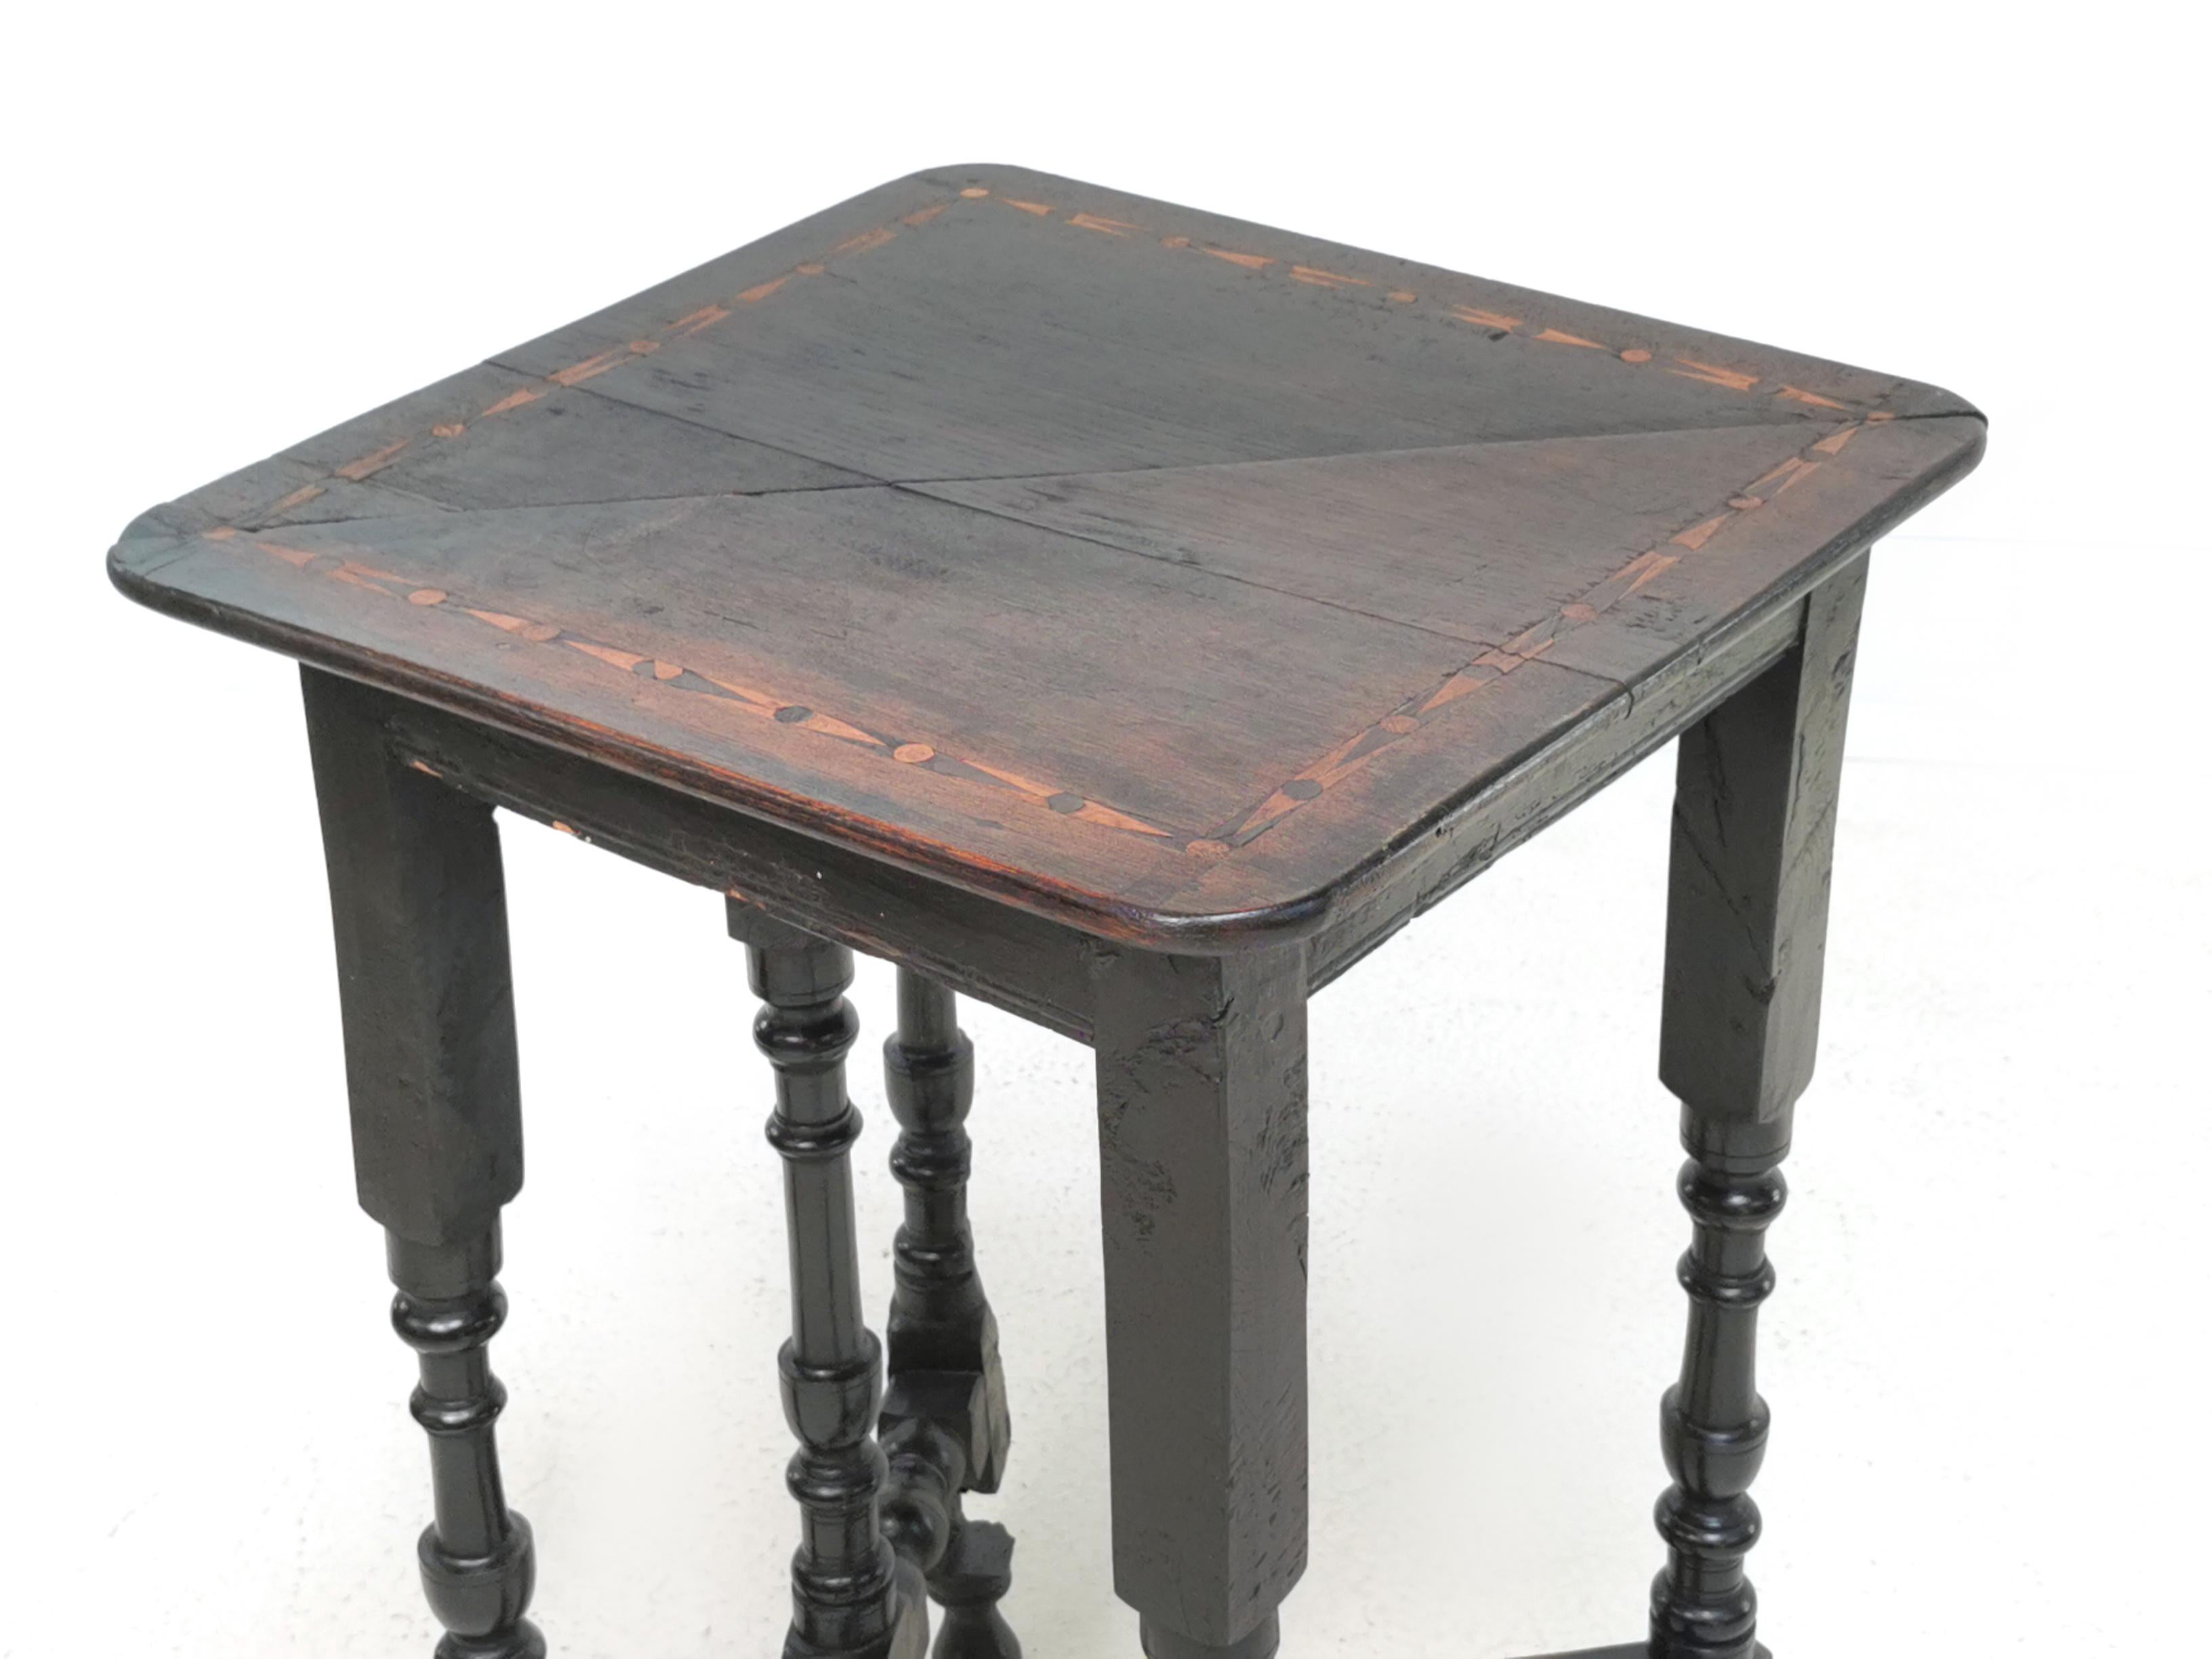 Dutch Gateleg table 

A Dutch 18th-century small oak gateleg table. A beautiful pattern to the outer tabletop. 

This drop leaf table is ready to use as a corner table, side table or coffee table. 

The piece has bags of character and is